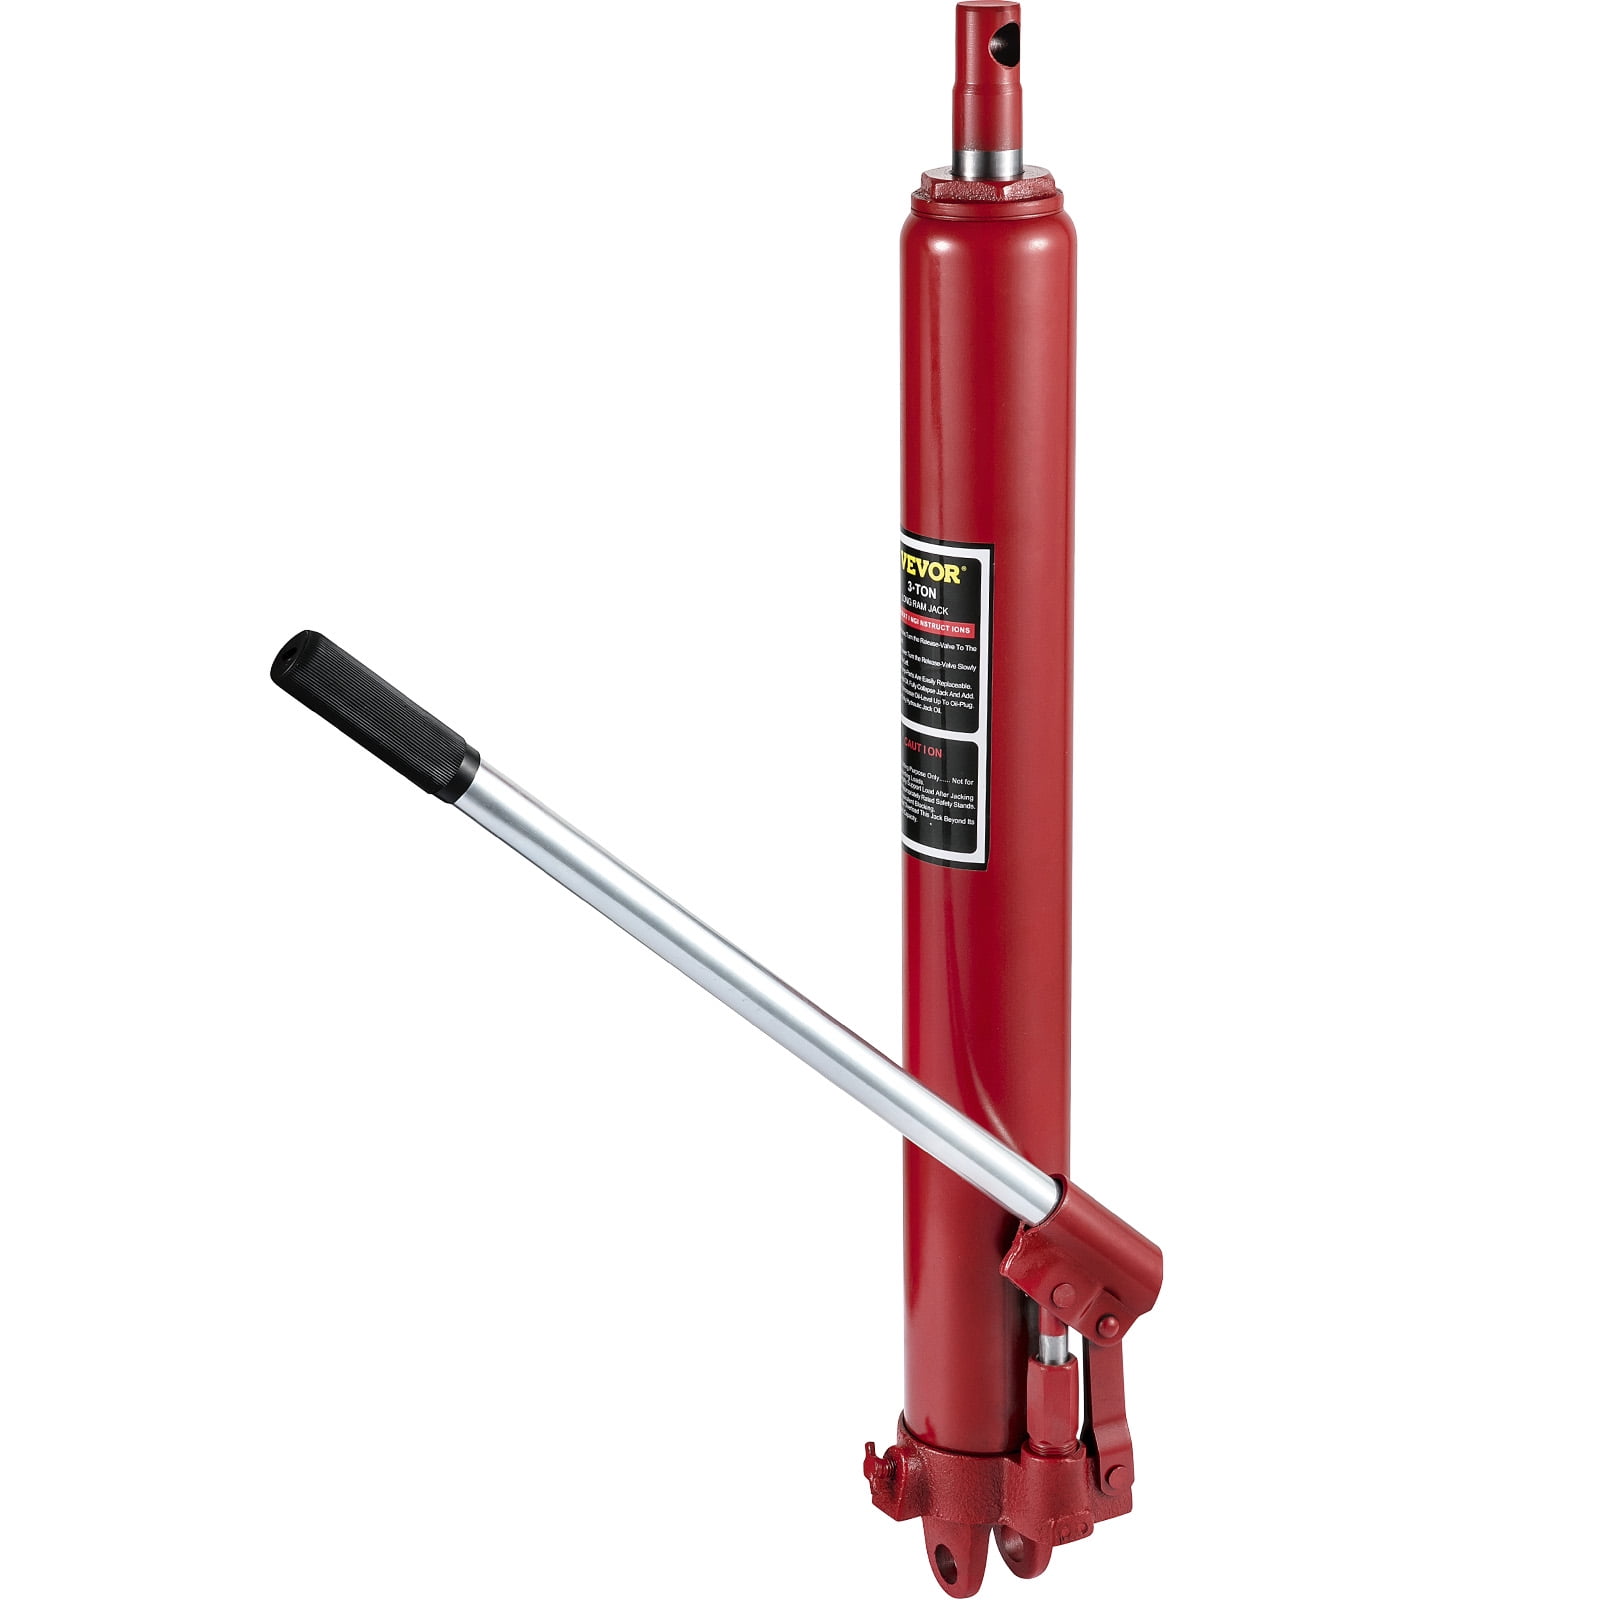 for Garage/Shop Cranes Engine Lift Hoist Manual Cherry Picker w/Handle VEVOR Hydraulic Long Ram Jack 3 Tons/6600 lbs Capacity with Single Piston Pump and Clevis Base Red 